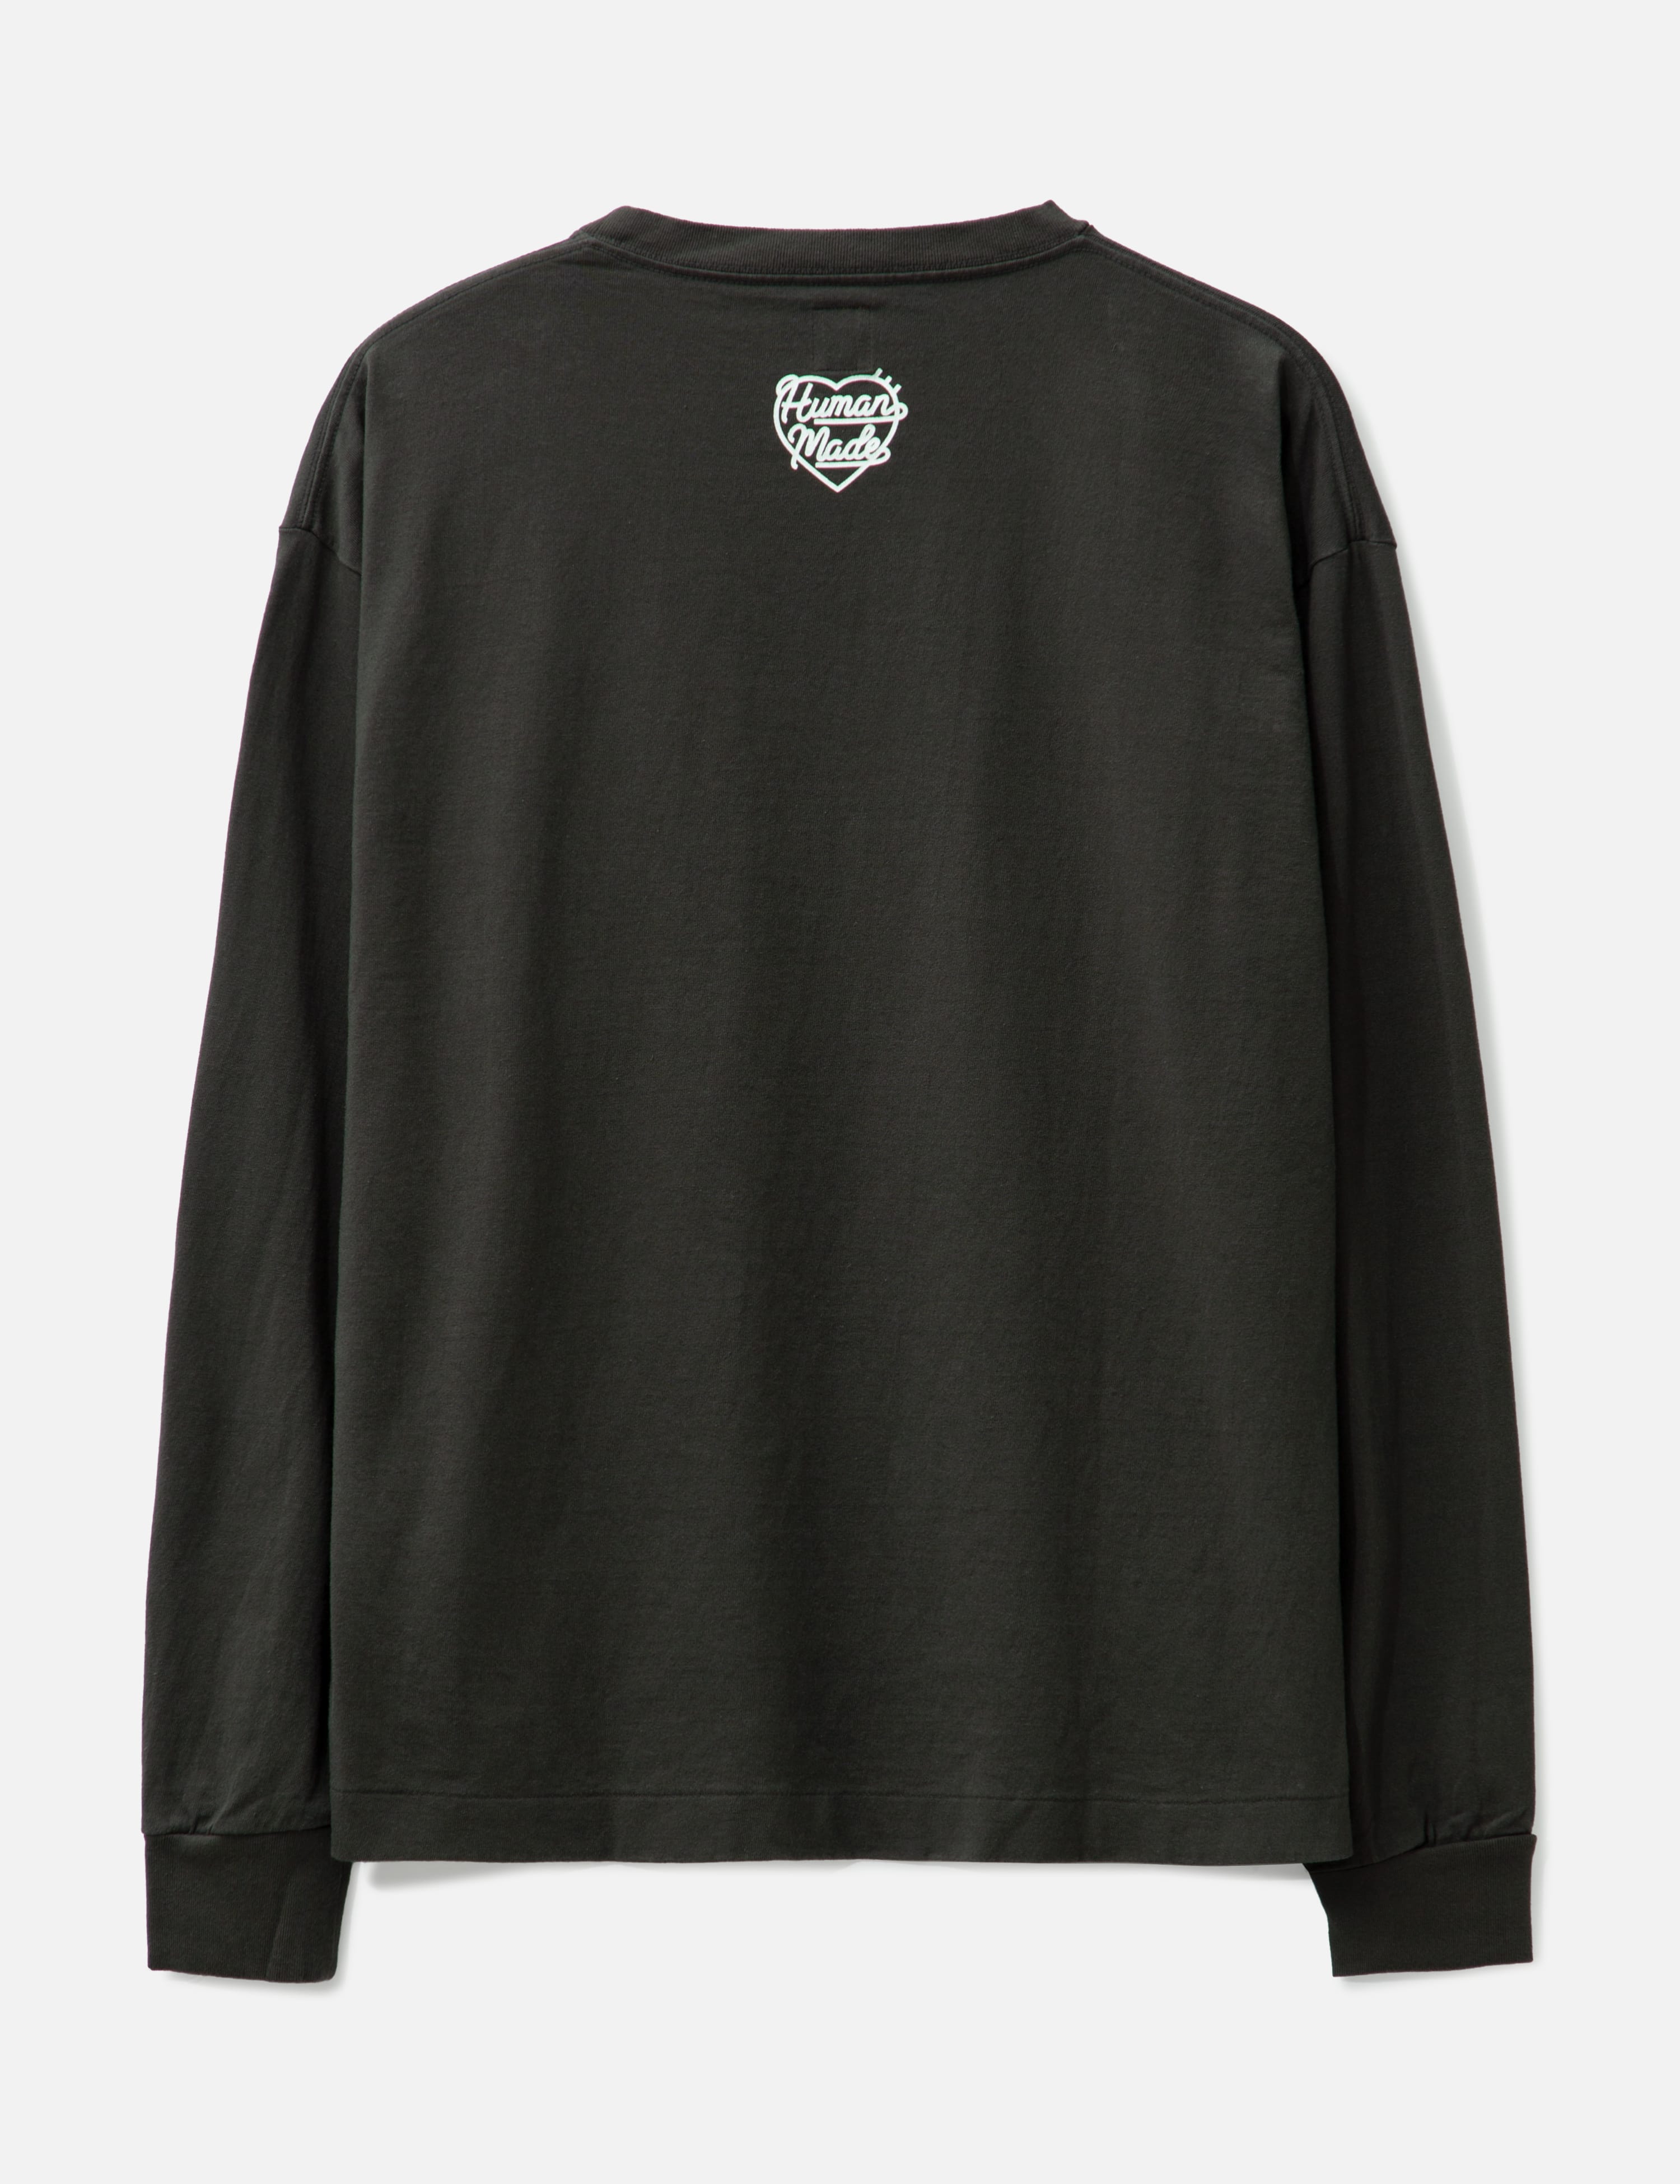 Human Made Graphic Long Sleeve T-shirt #4 In Black | ModeSens